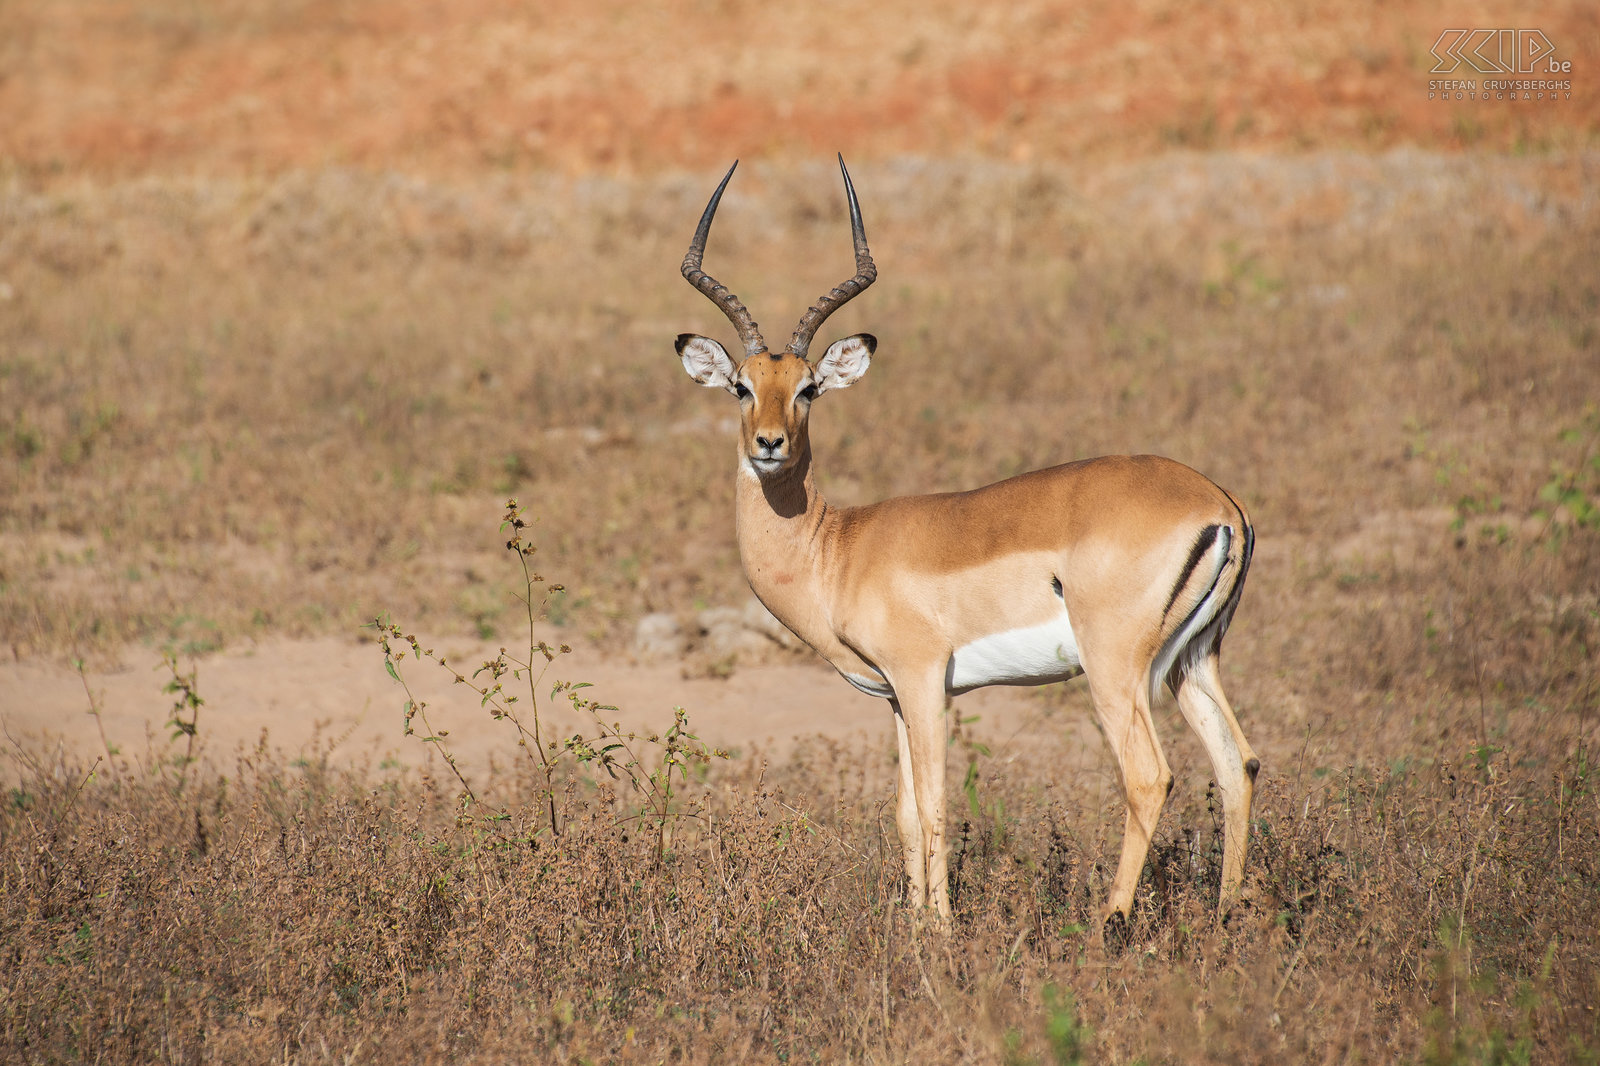 South Luangwa - Impala A male impala (Aepyceros melampus), one of the most common antelopes in Africa. Stefan Cruysberghs